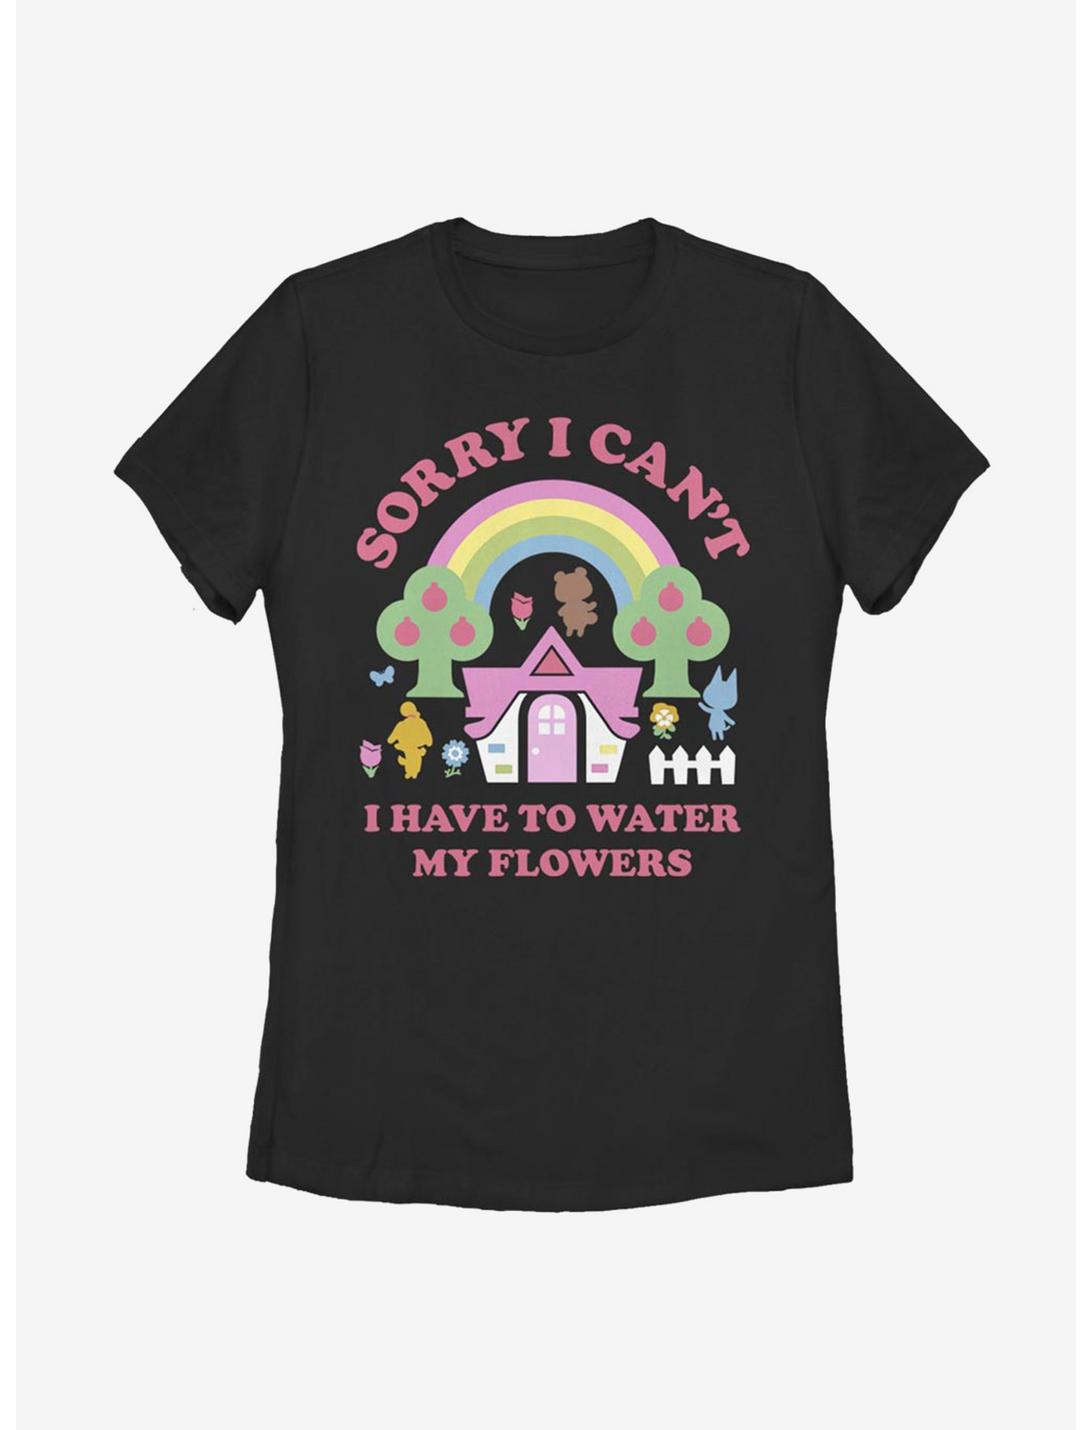 Plus Size Animal Crossing Have To Water My Flowers Womens T-Shirt, BLACK, hi-res